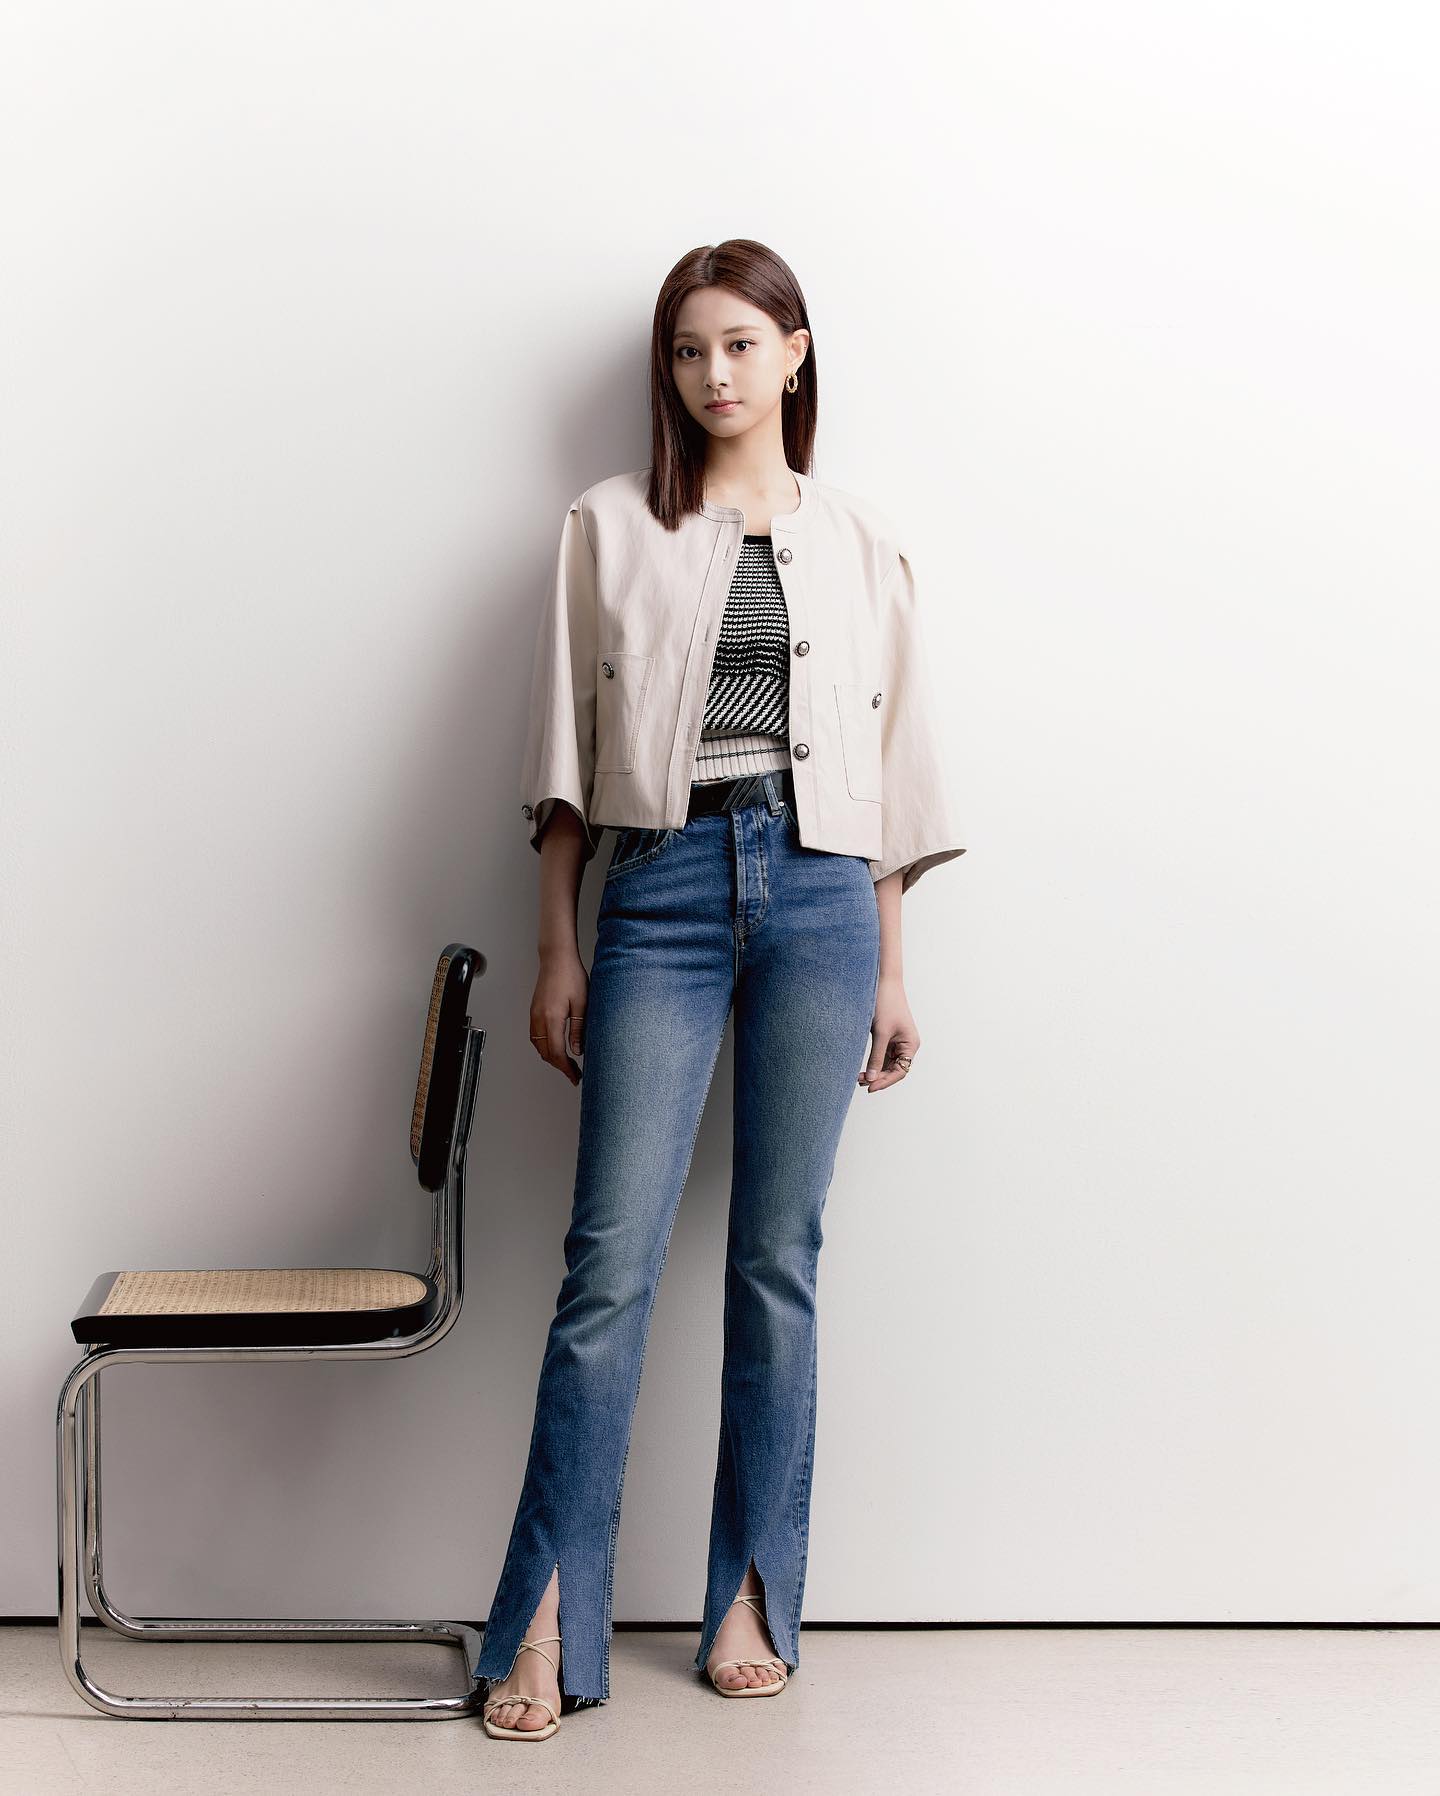 Spring-Summer-Woman-Short-Jacket-Outfit-Zooc-Tzuyu-A.jpg